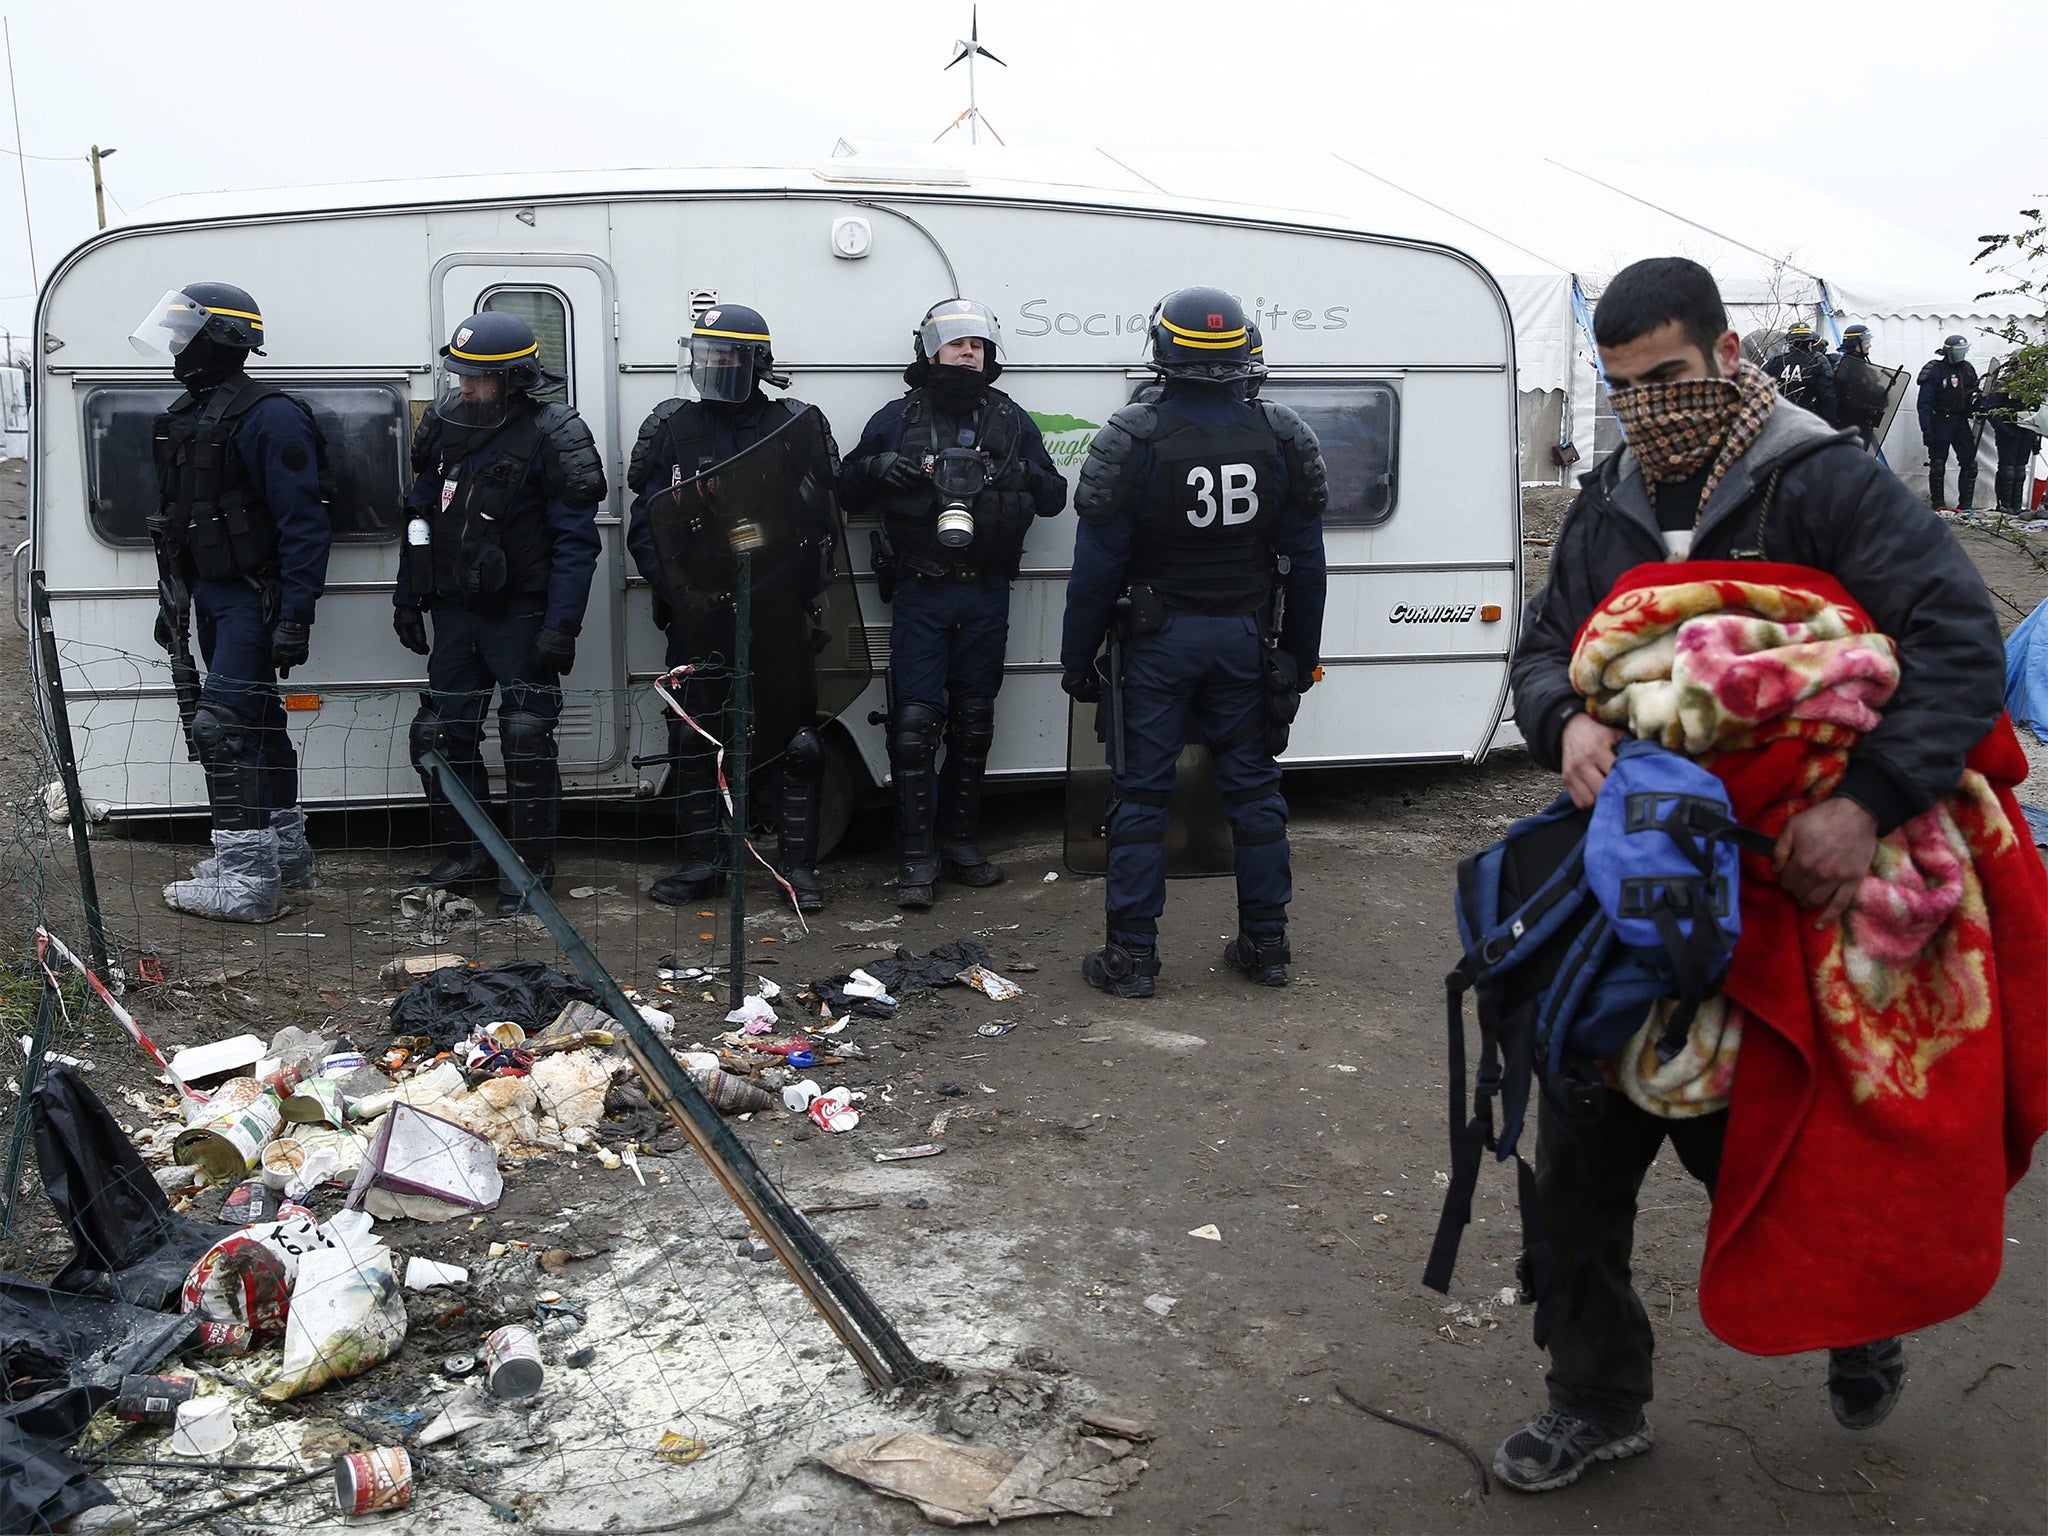 French riot police secure an area inside the camp